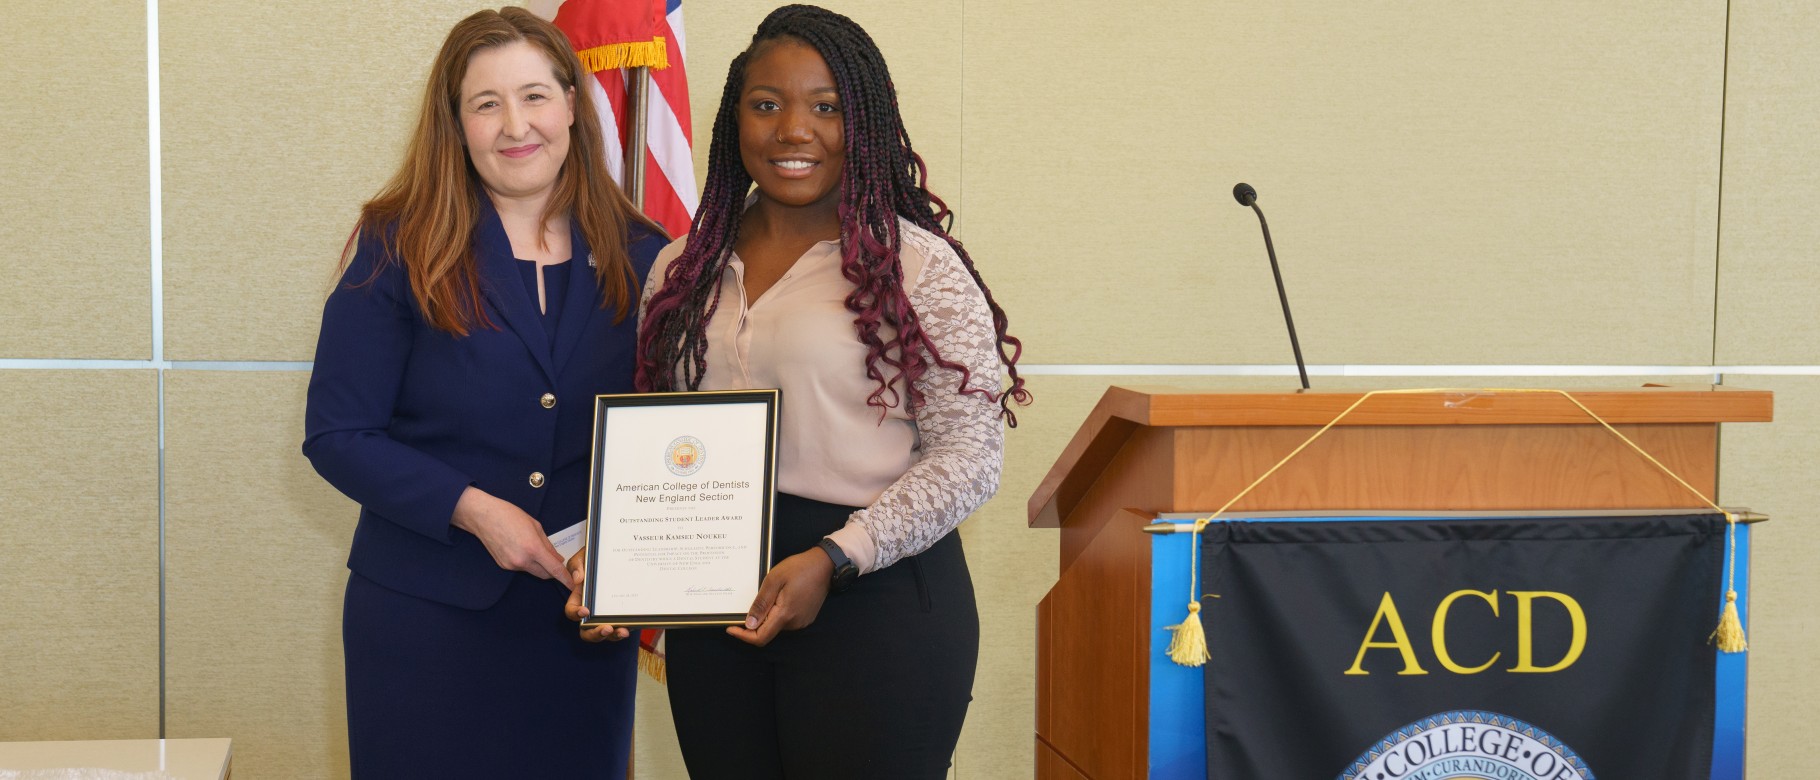 College of Dental Medicine Dean Nicole Kimmes, D.D.S., poses with Class of 2023 student Vasseur “Doria” Kamseu Noukeu, who was presented with the ACD Outstanding Student Leadership Award. 